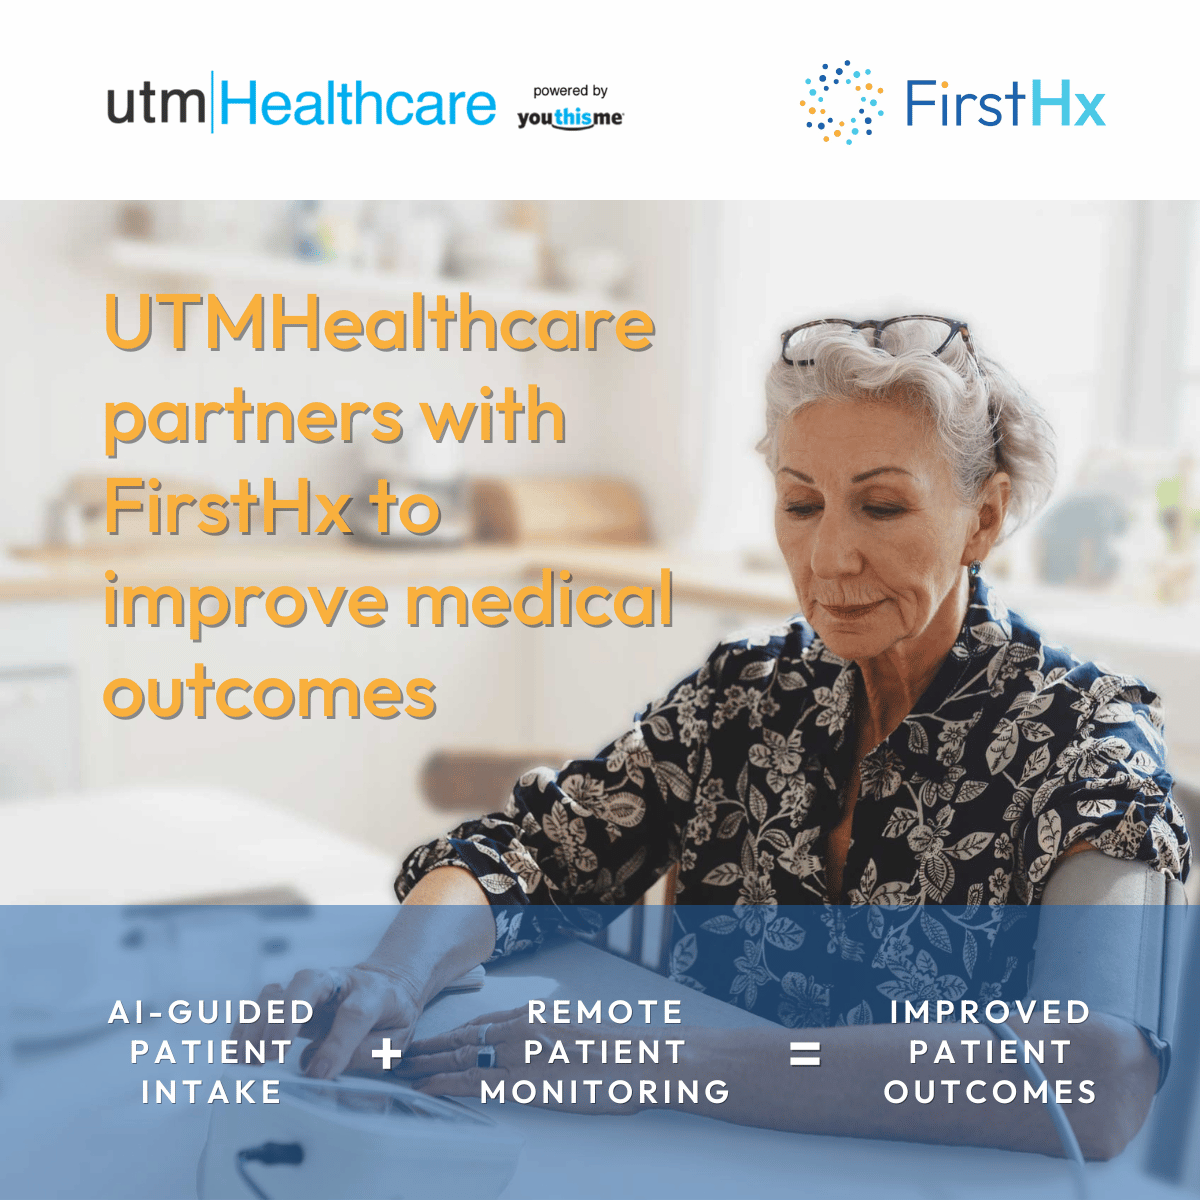 UTMHealthcare Partners with FirstHx to Improve Medical Outcomes

Read the release here: firsthx.com/utmhealthcare-…

#partnership #ai #medicalhistory #patientintake #remotepatientmonitoring